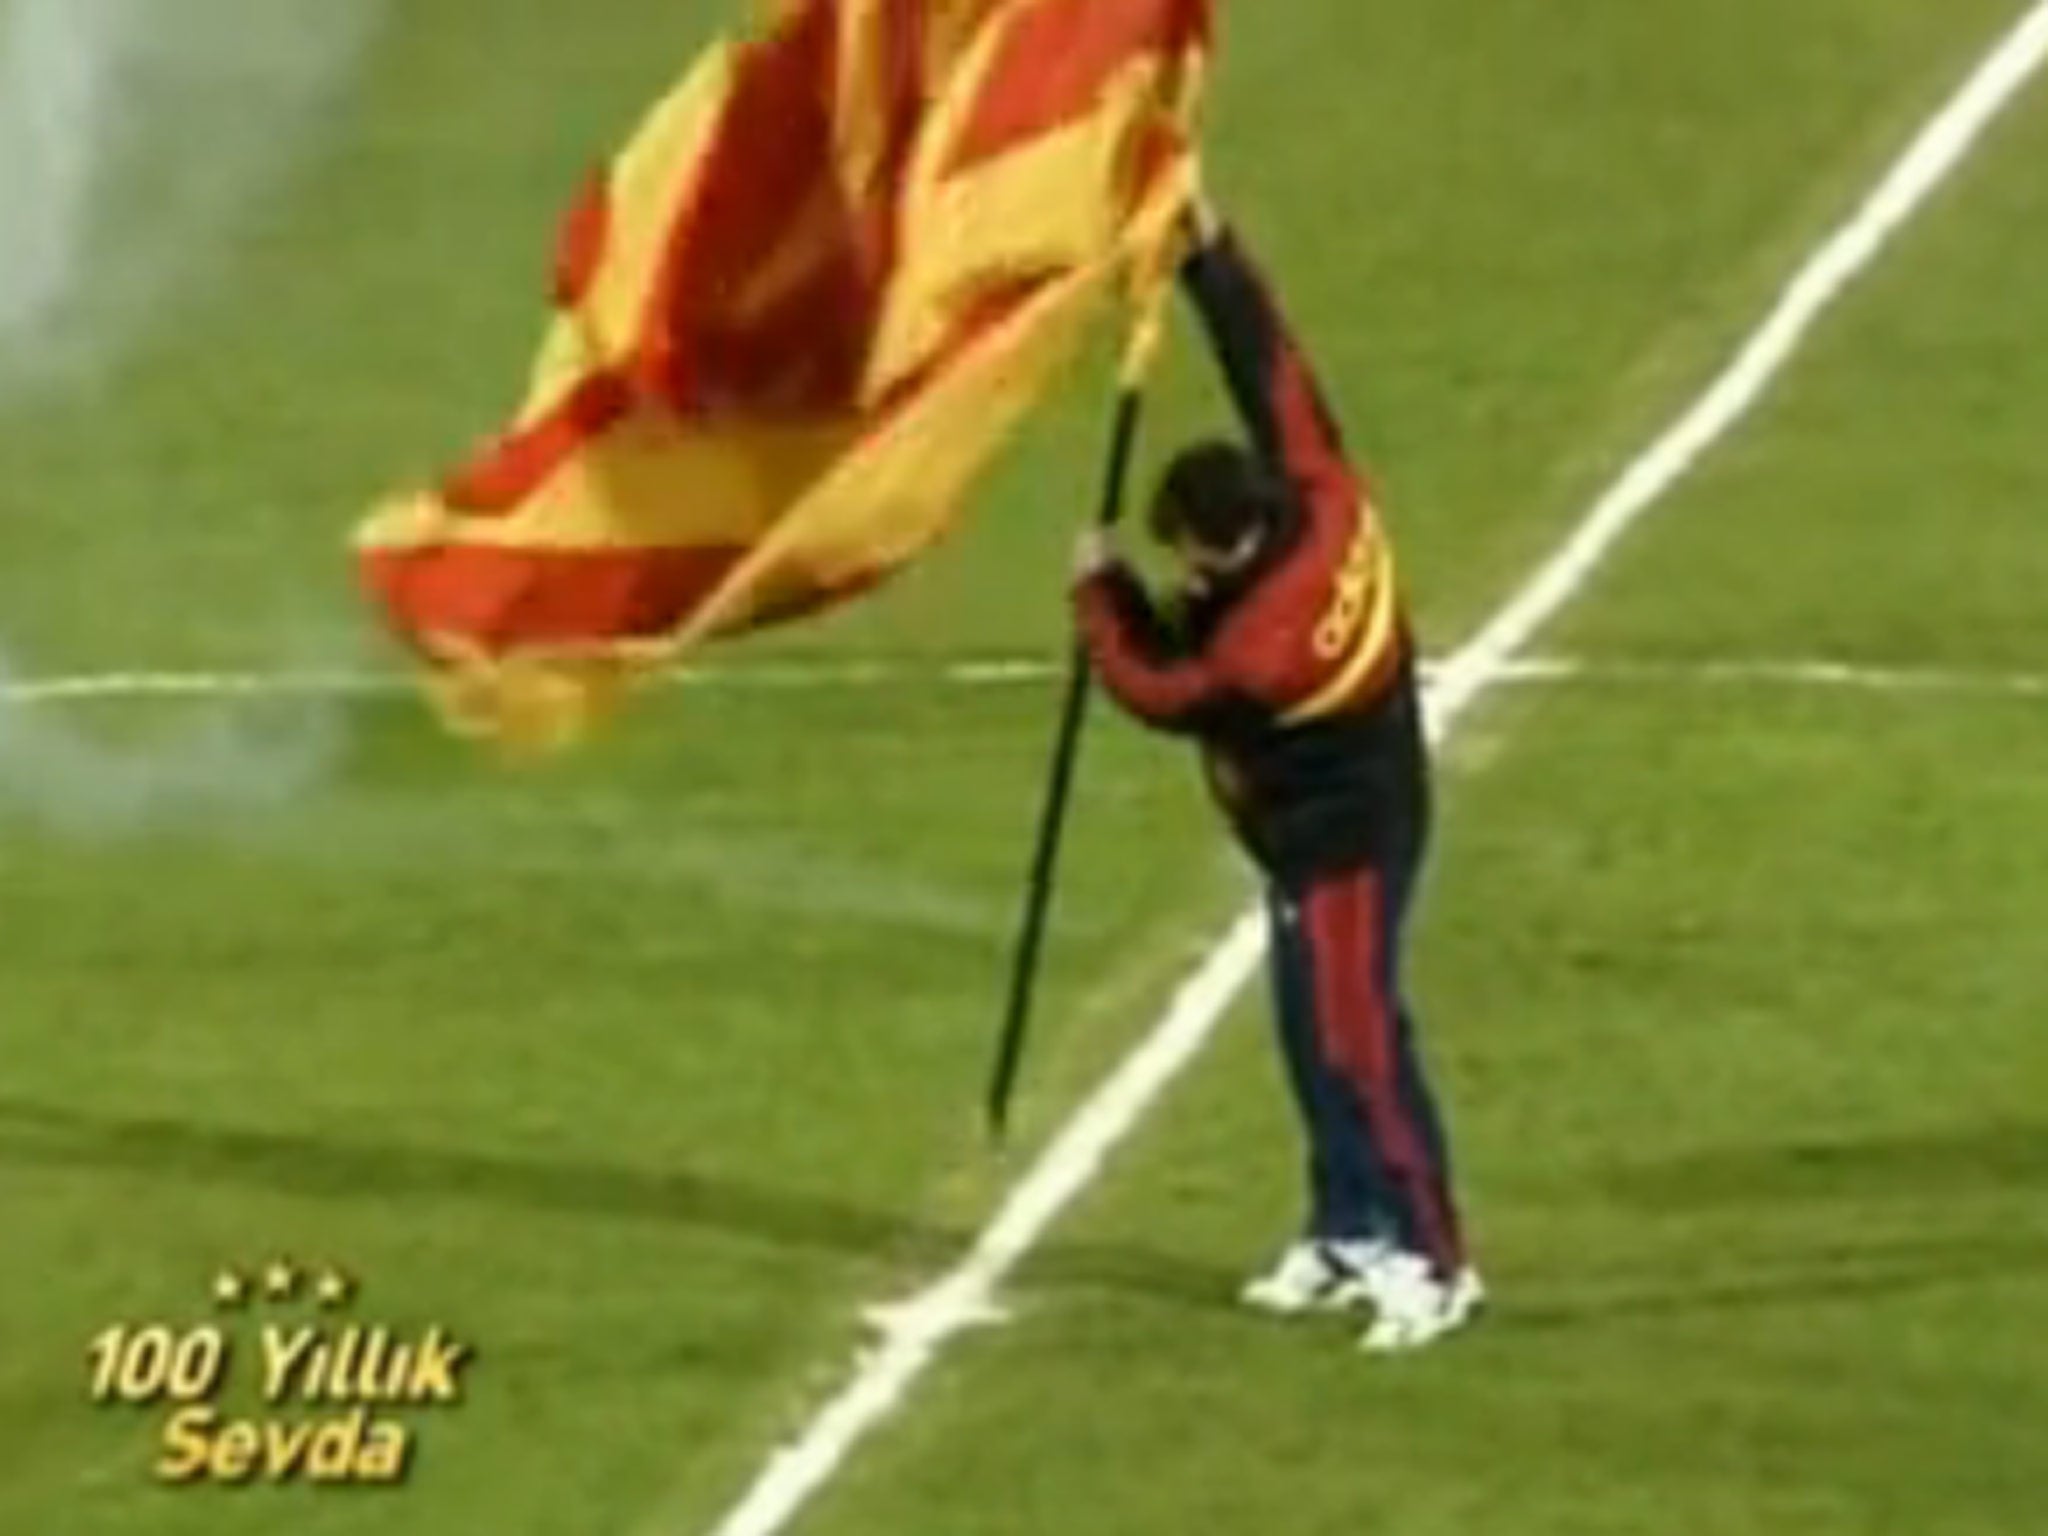 Graeme Souness infamously plants a flag in the centre of the Fenerbahce pitch in 1996